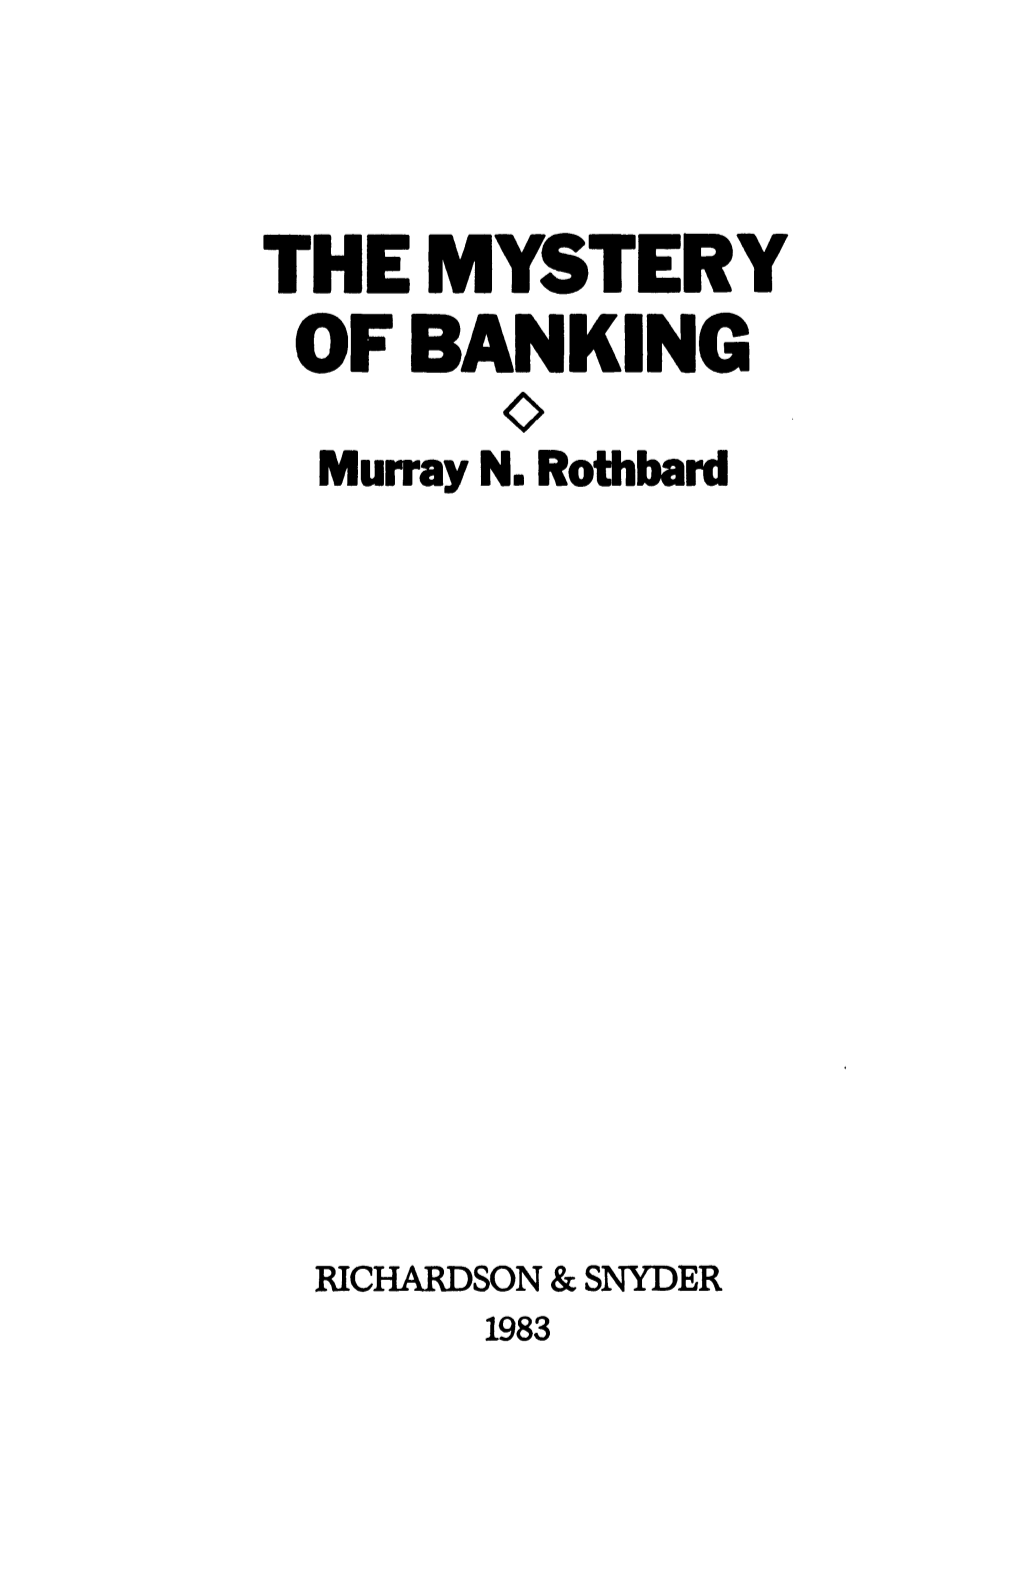 The Mytery of Banking